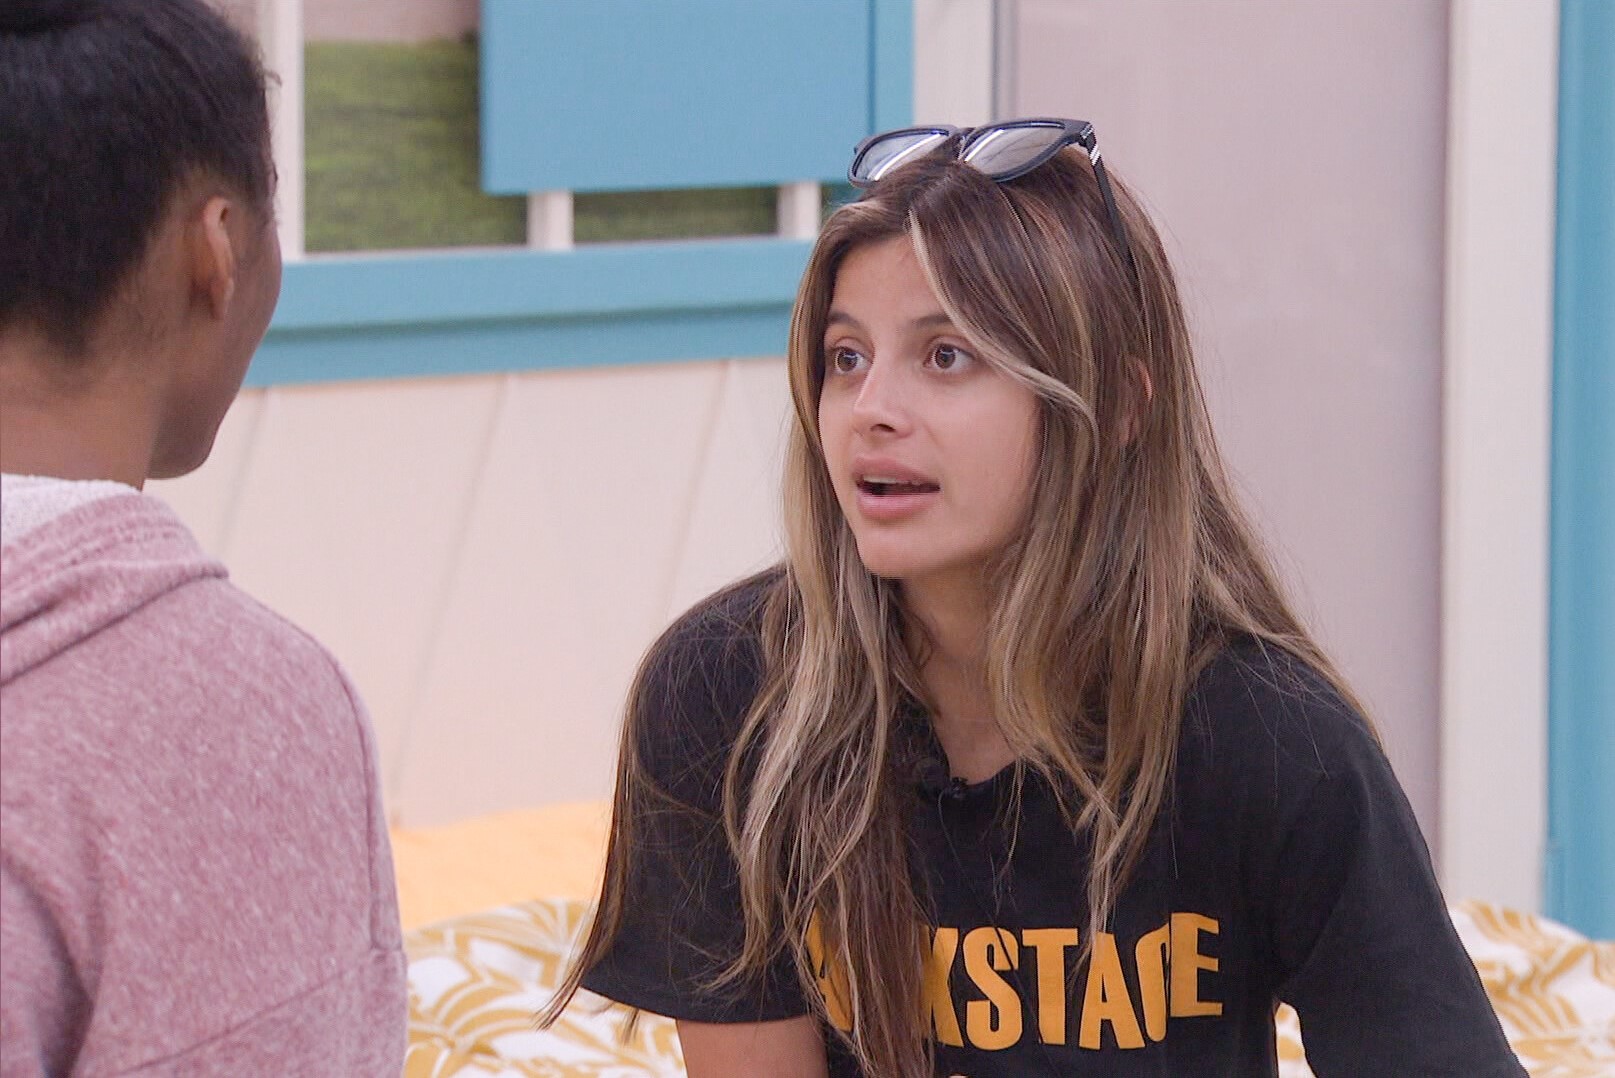 Taylor Hale and Paloma Aguilar discuss the game during an episode of 'Big Brother 24.' Taylor wears a light pink hoodie. Paloma wears her black Backstage shirt.